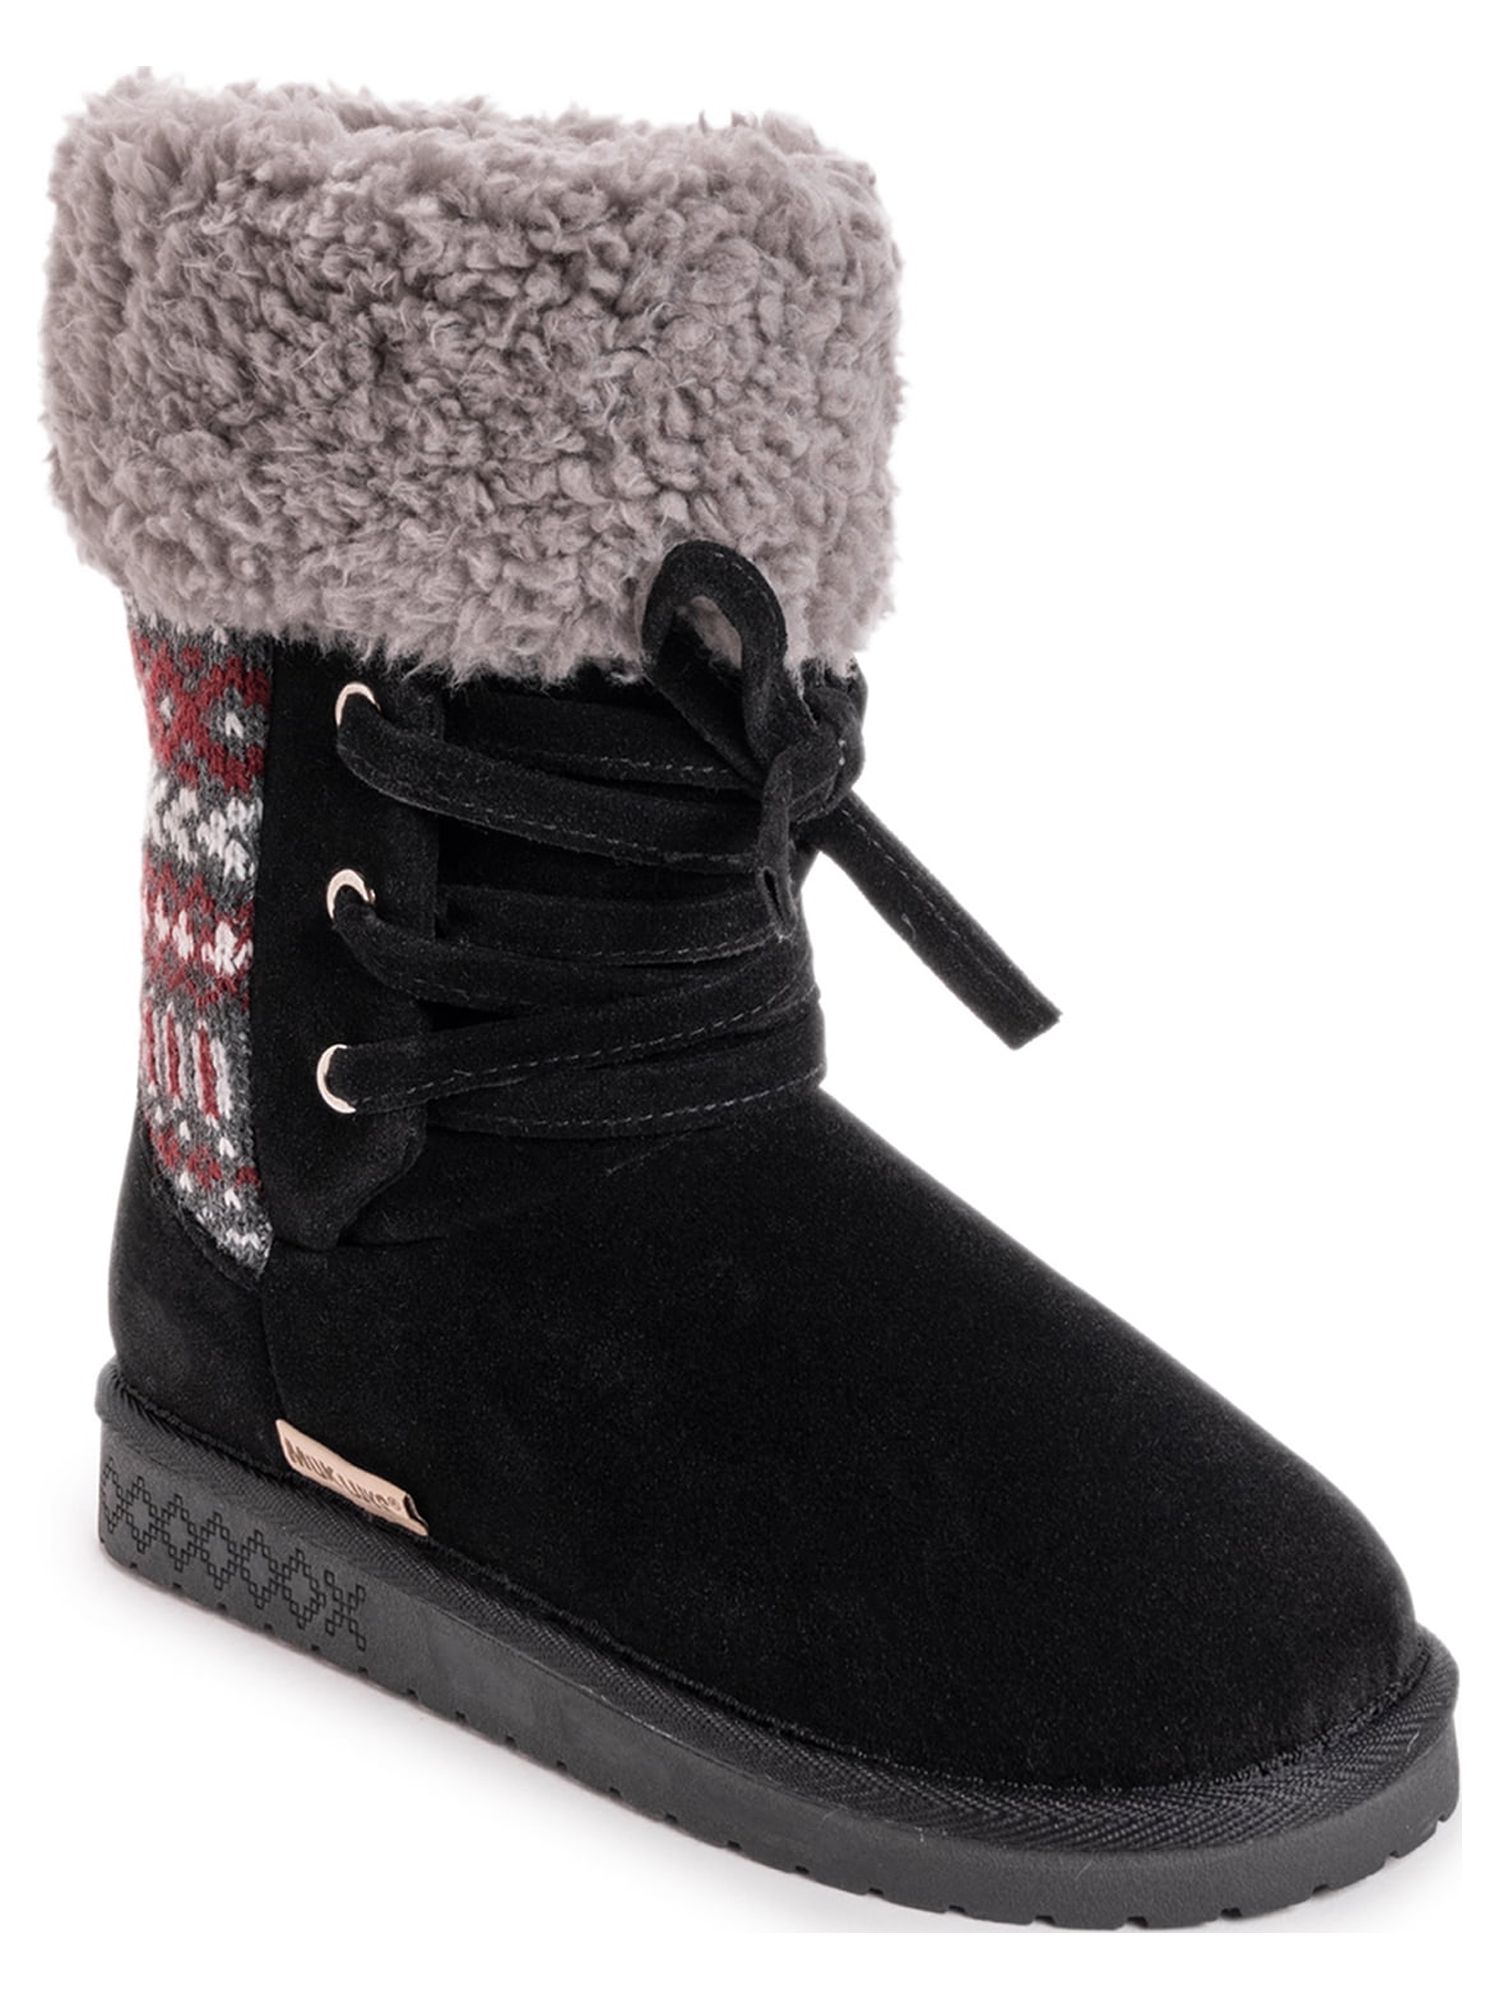 Muk Luks Women's Melba Faux Fur Lined Lace Up Booties (Wide Width Available) - image 1 of 8